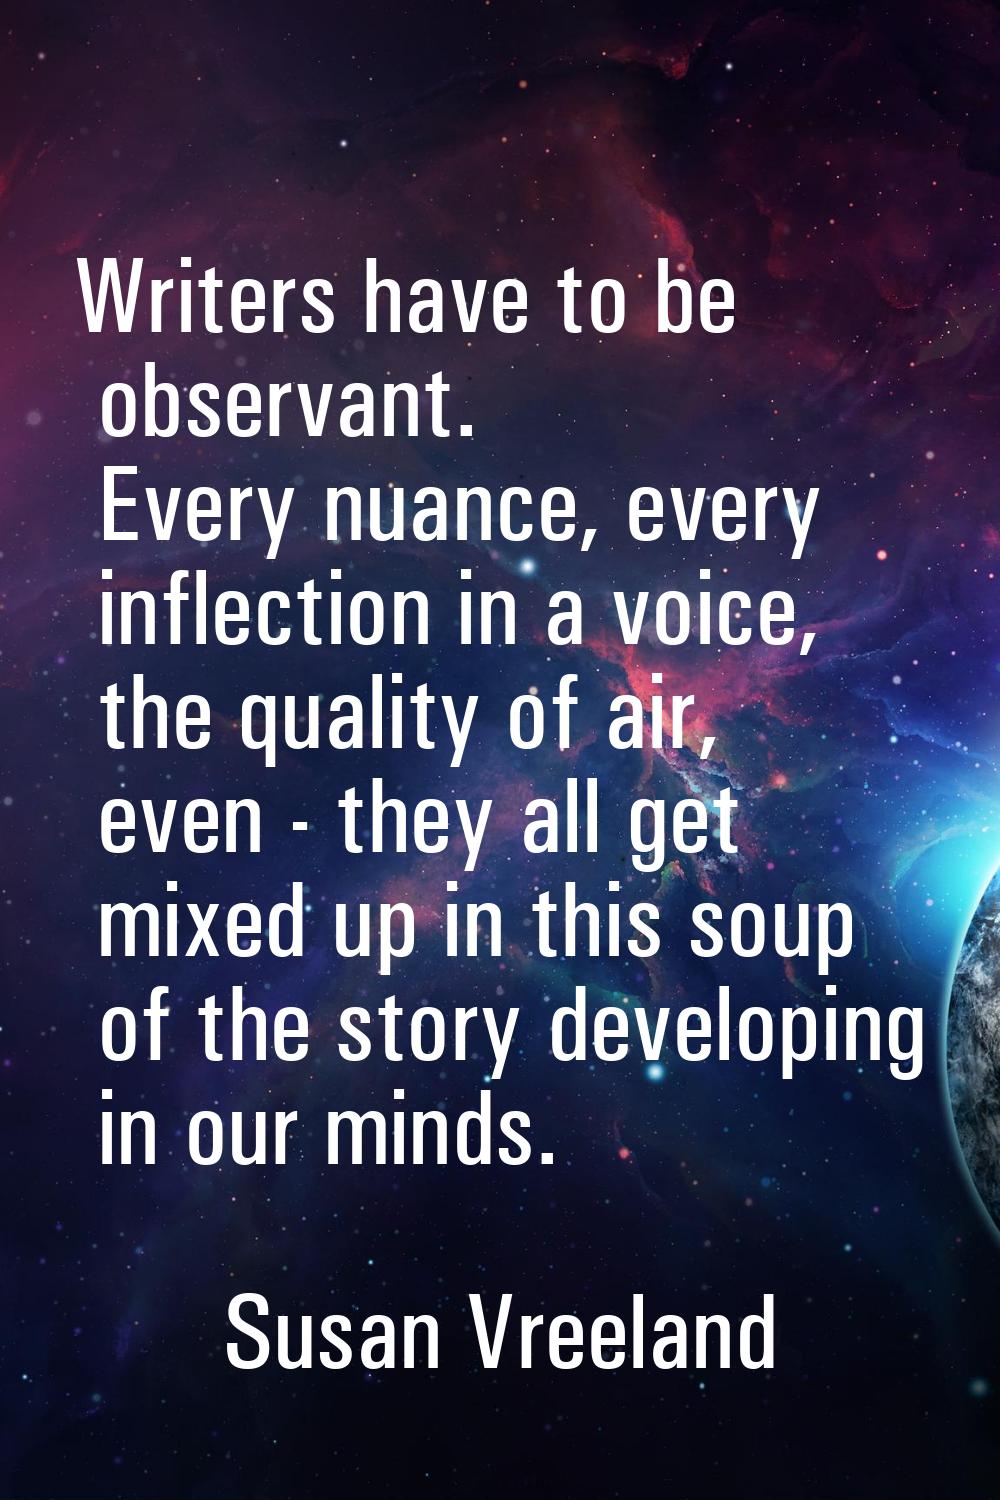 Writers have to be observant. Every nuance, every inflection in a voice, the quality of air, even -